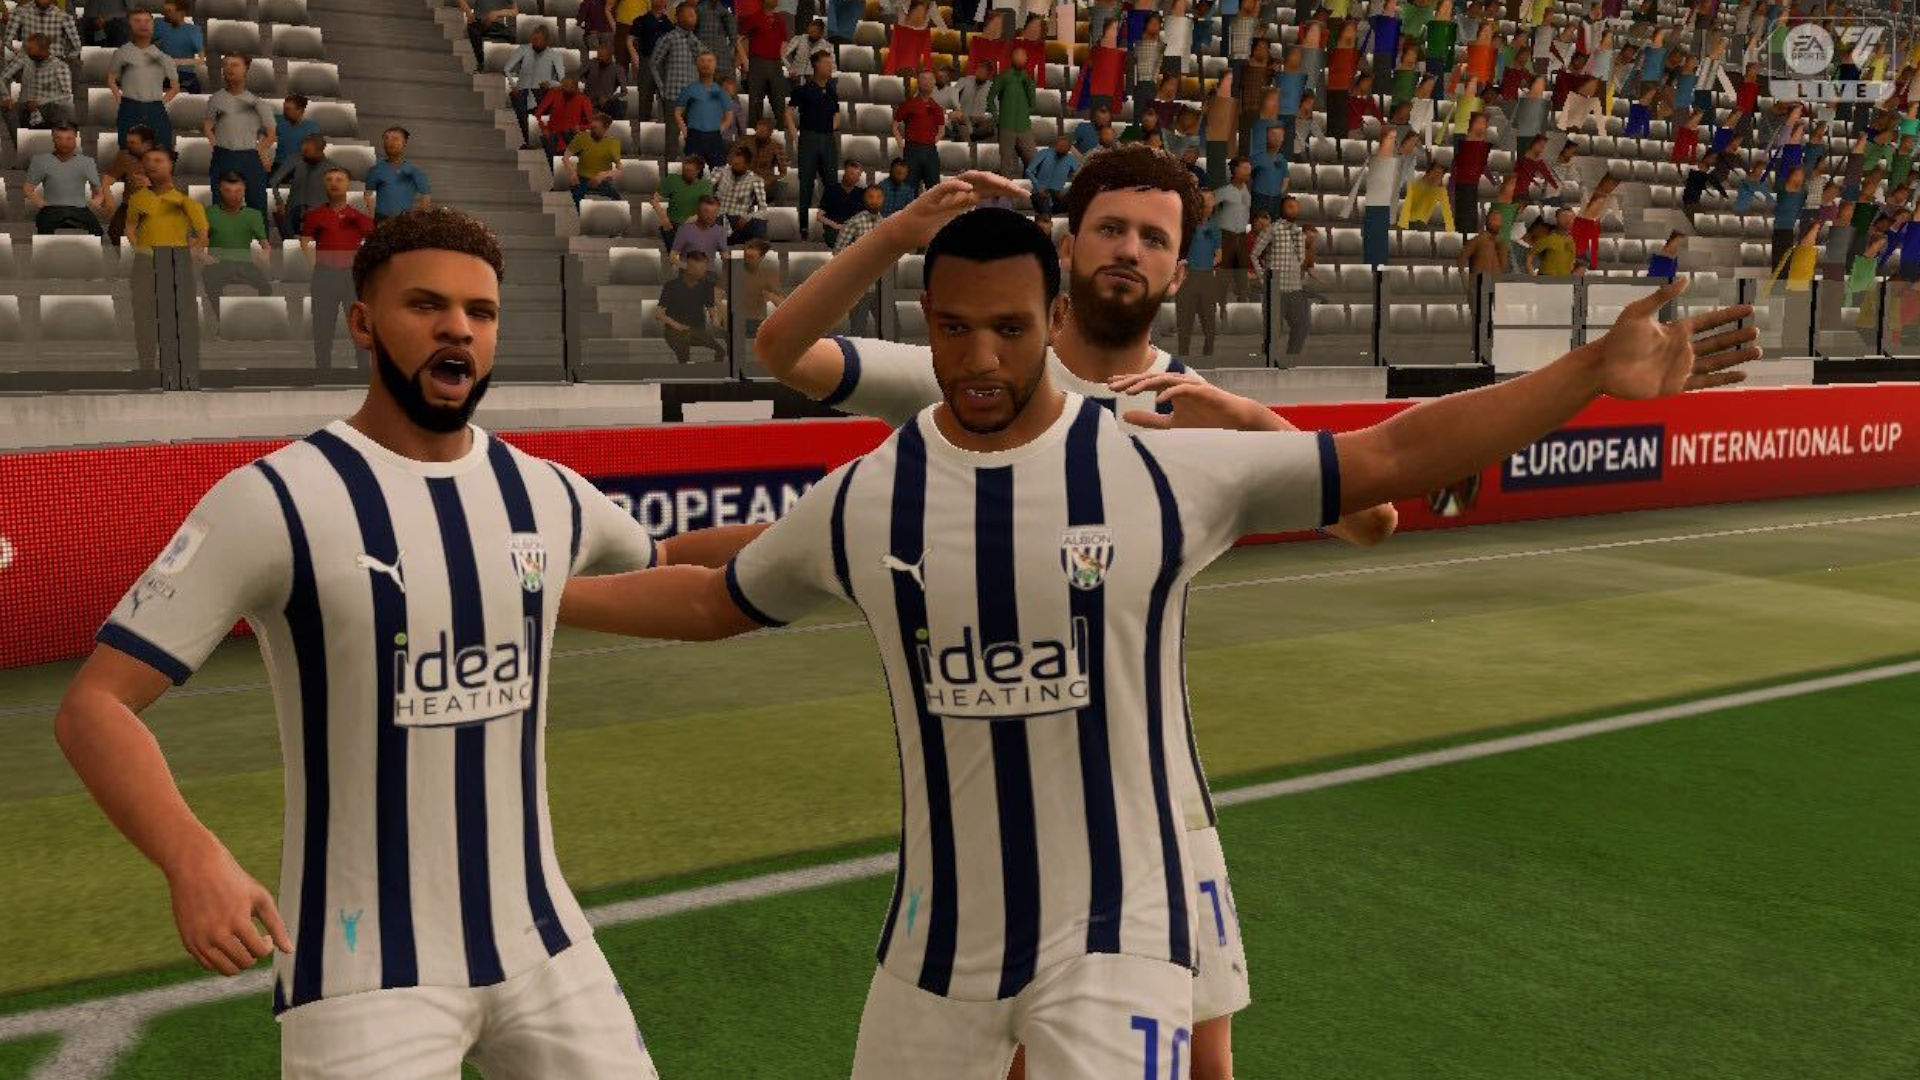 EA Sports FC 24 is NOT GOOD - Review 